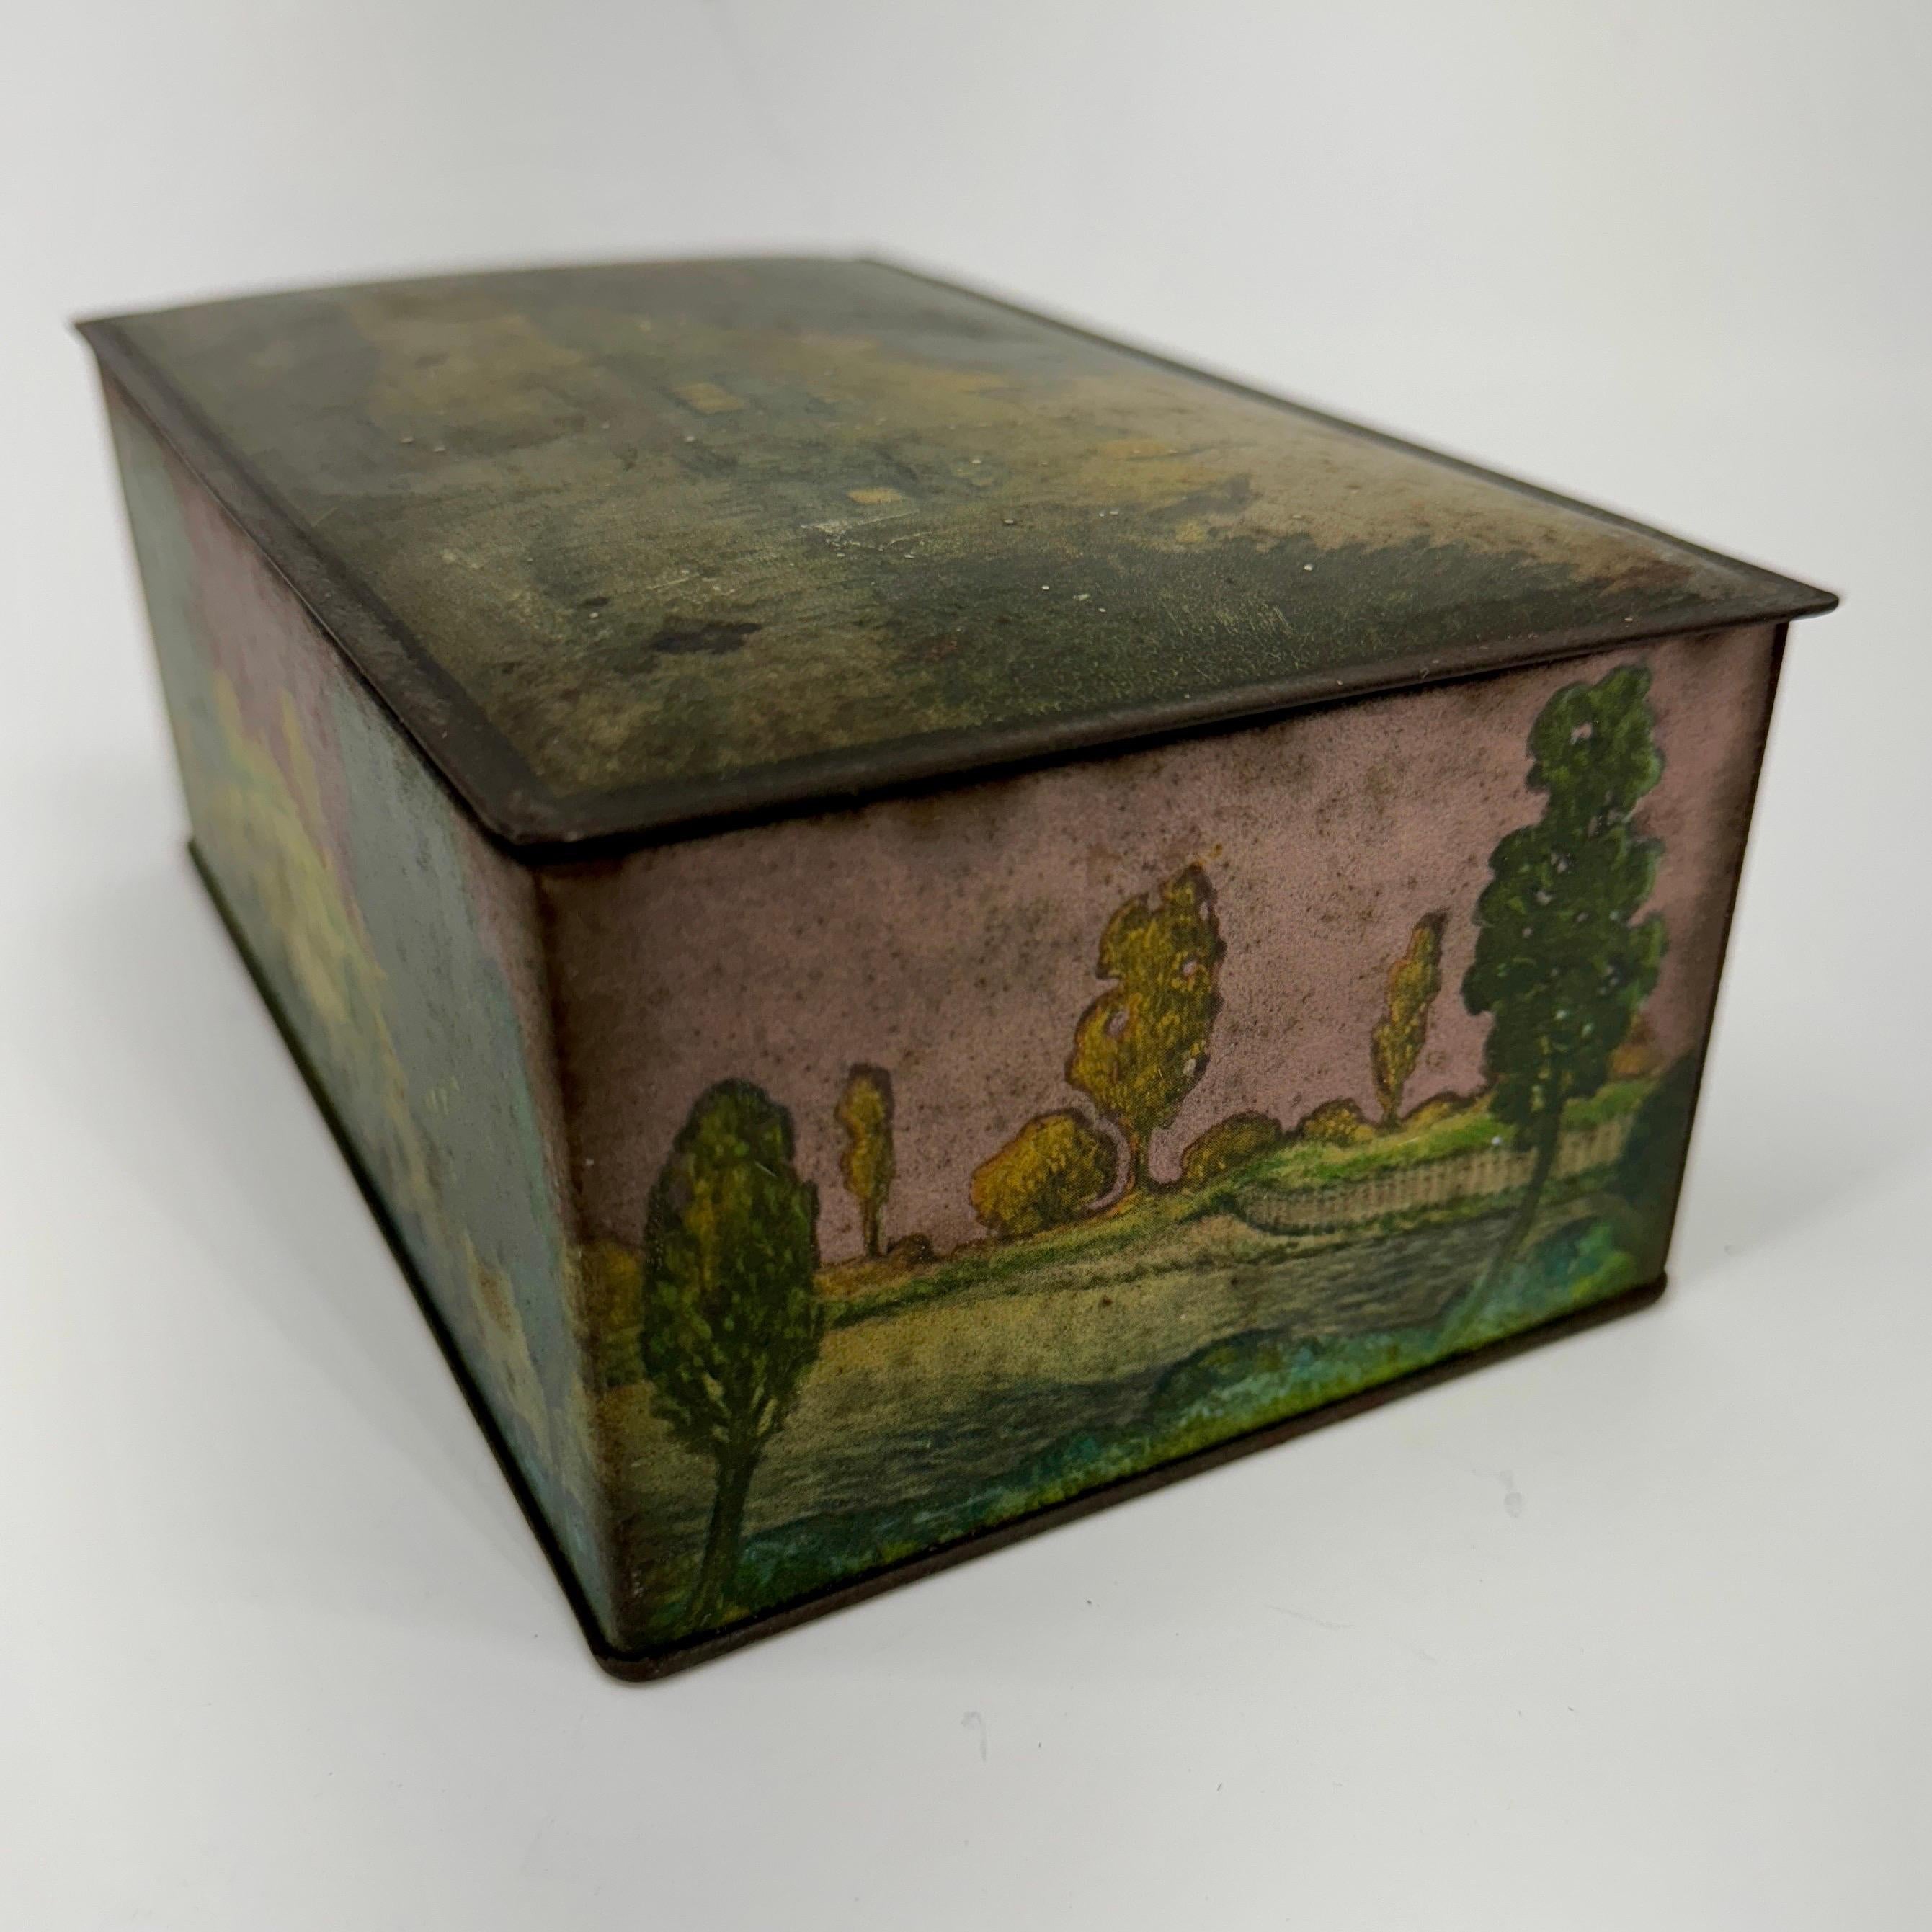 19th Century Painted Tin Rectangular Box with Landscape from Canco